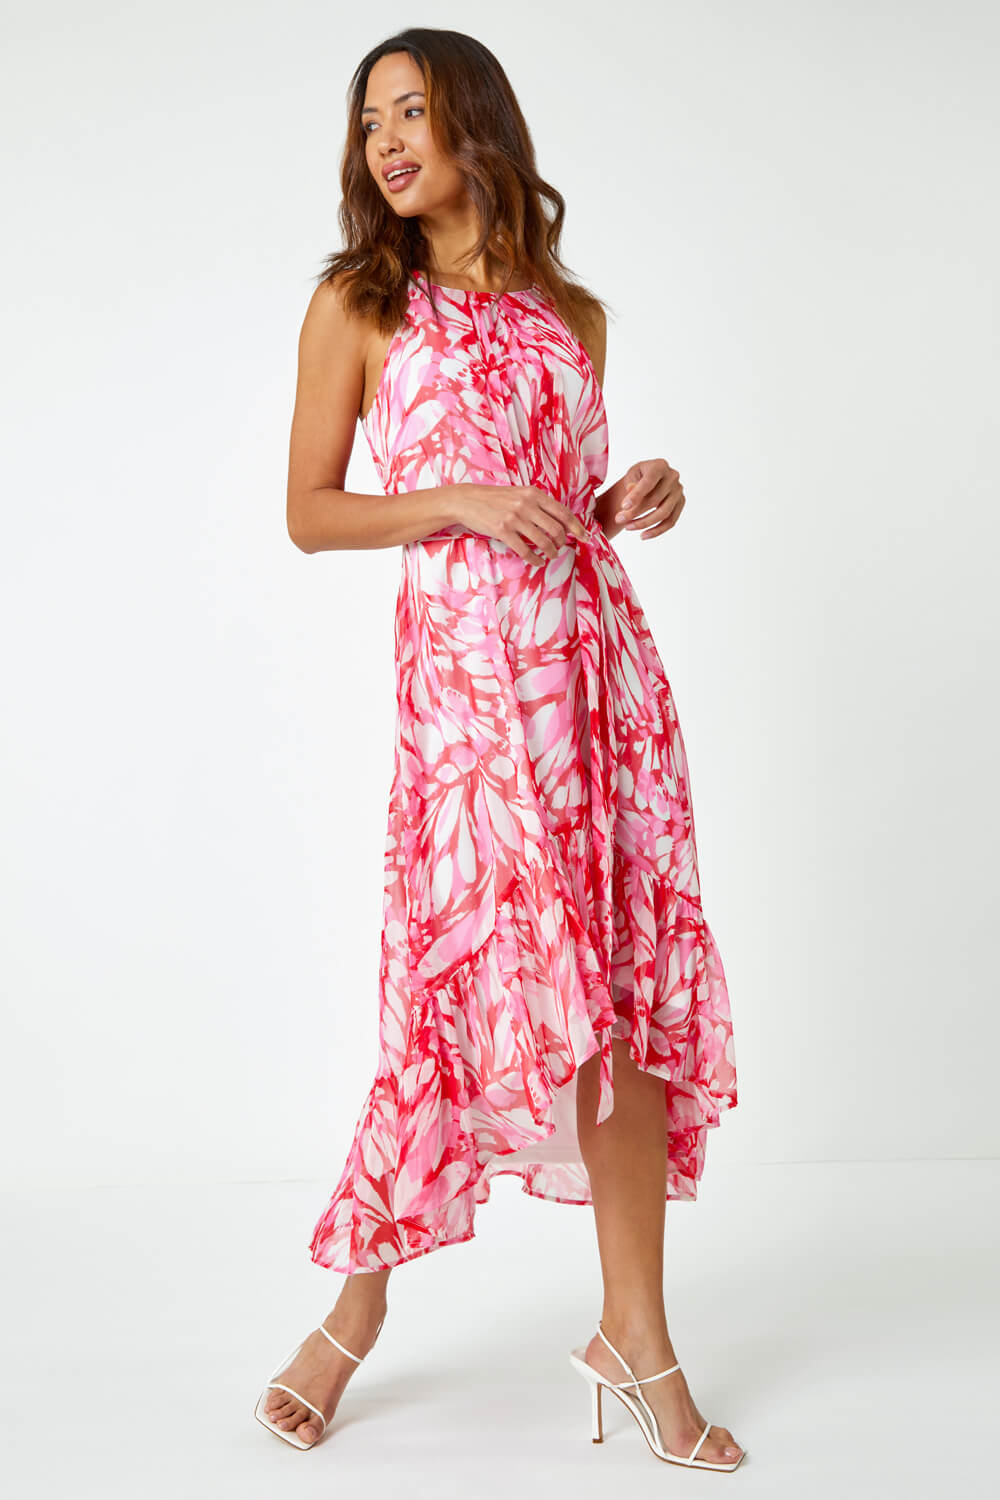 PINK Halter Neck Butterfly Print Dress, Image 3 of 5